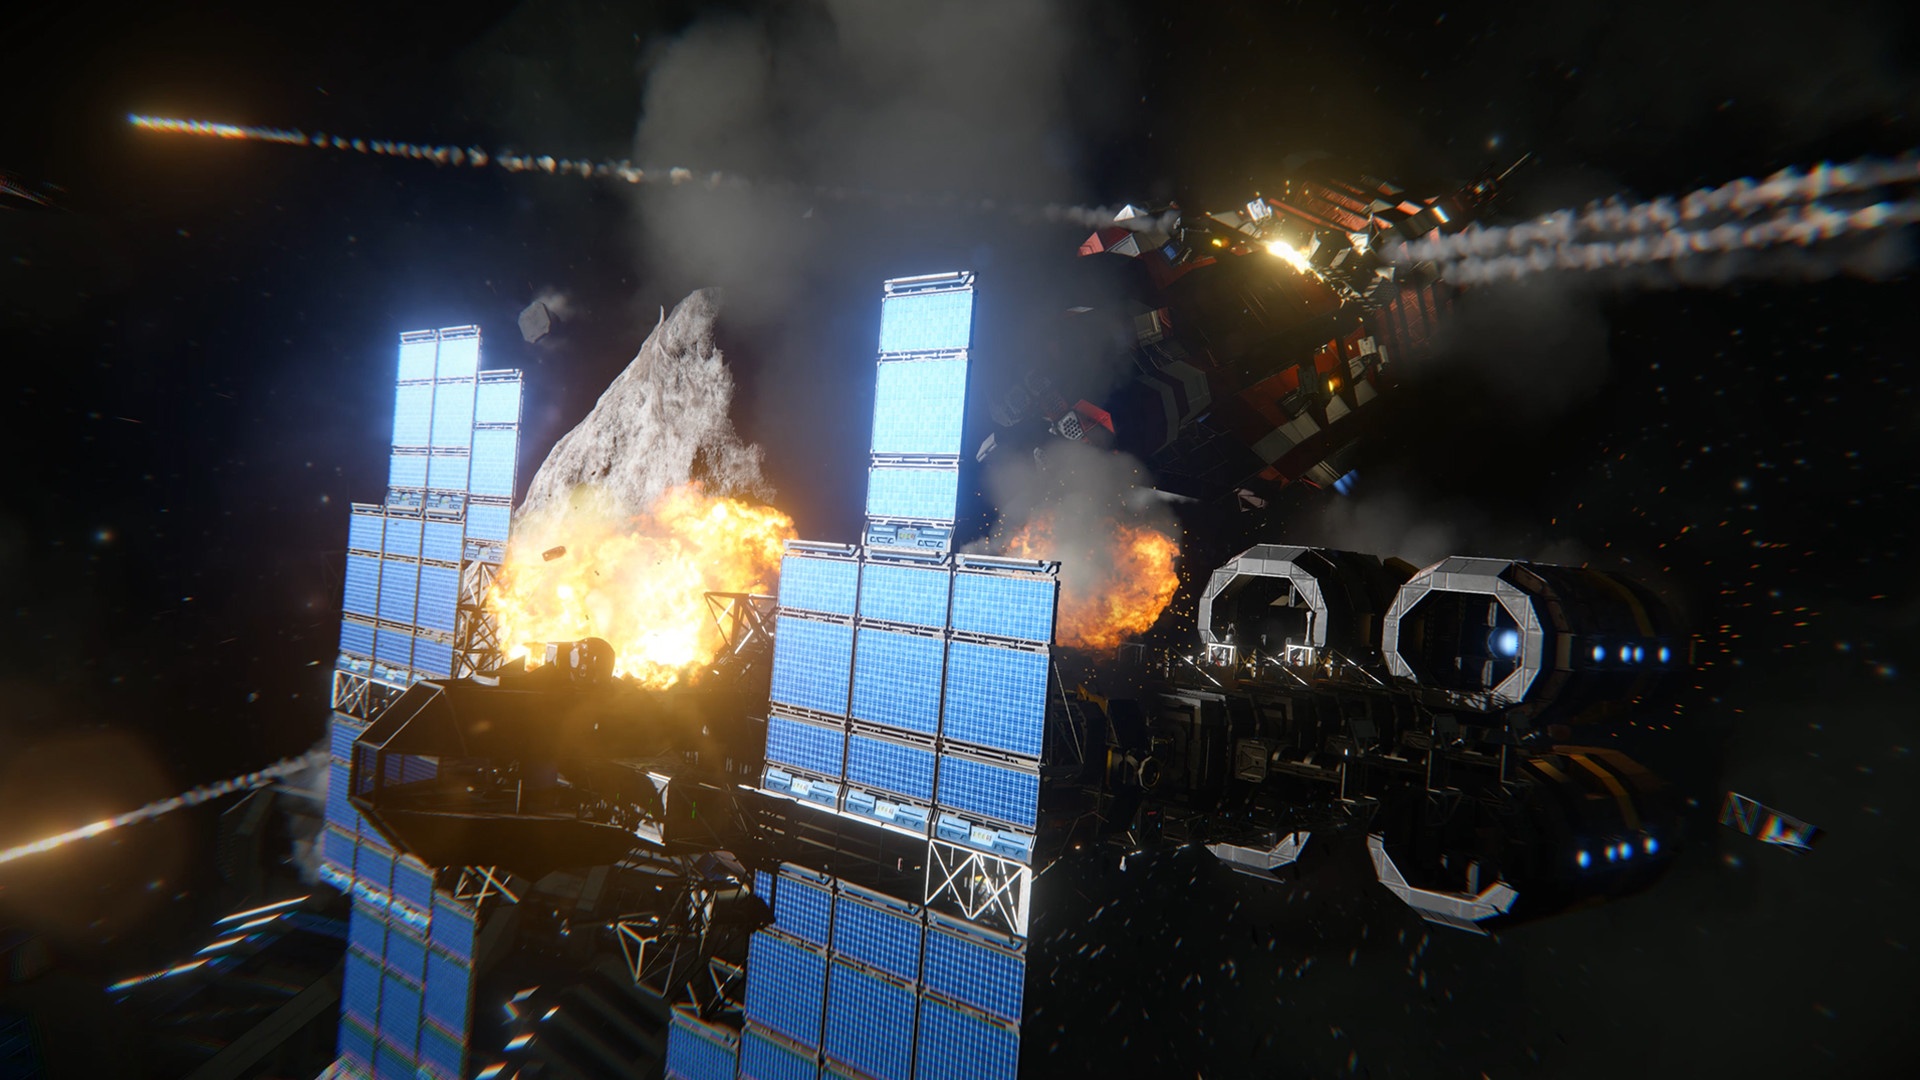 space engineers release date for xbox